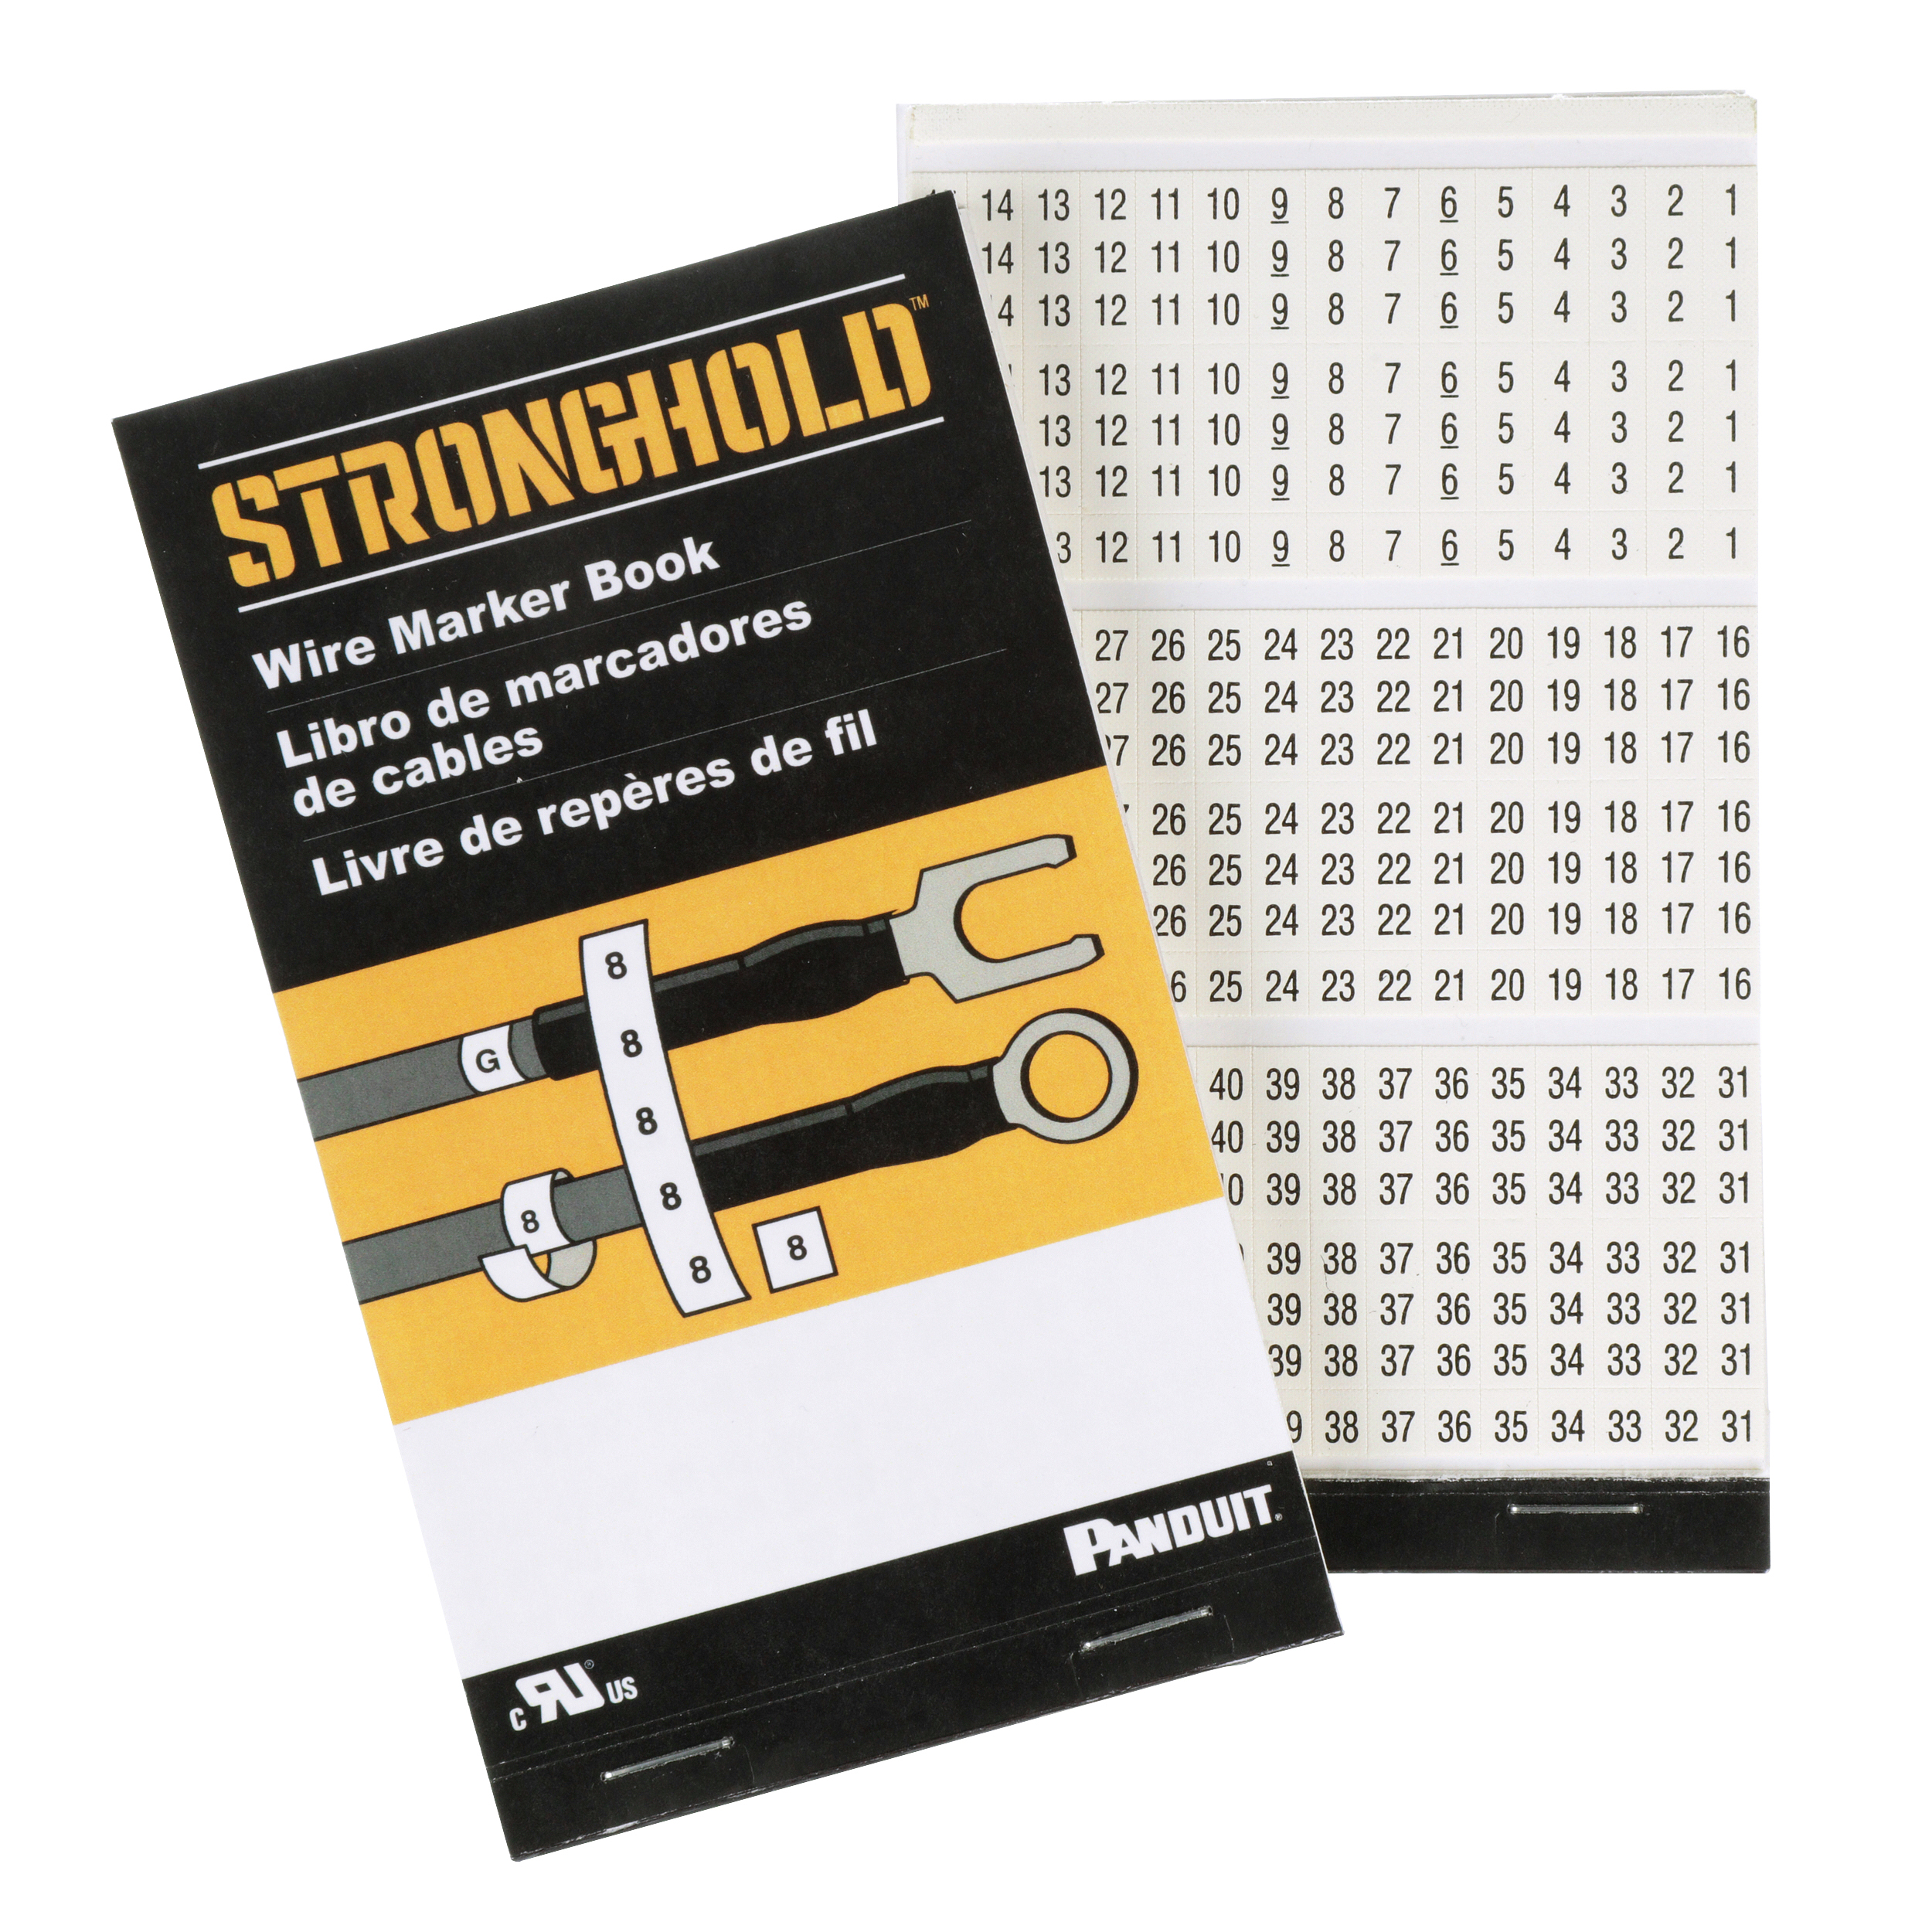 StrongHold™ PCMB-11 Pre-Printed Wire Marker Book, 11, Vinyl Cloth, White, Black